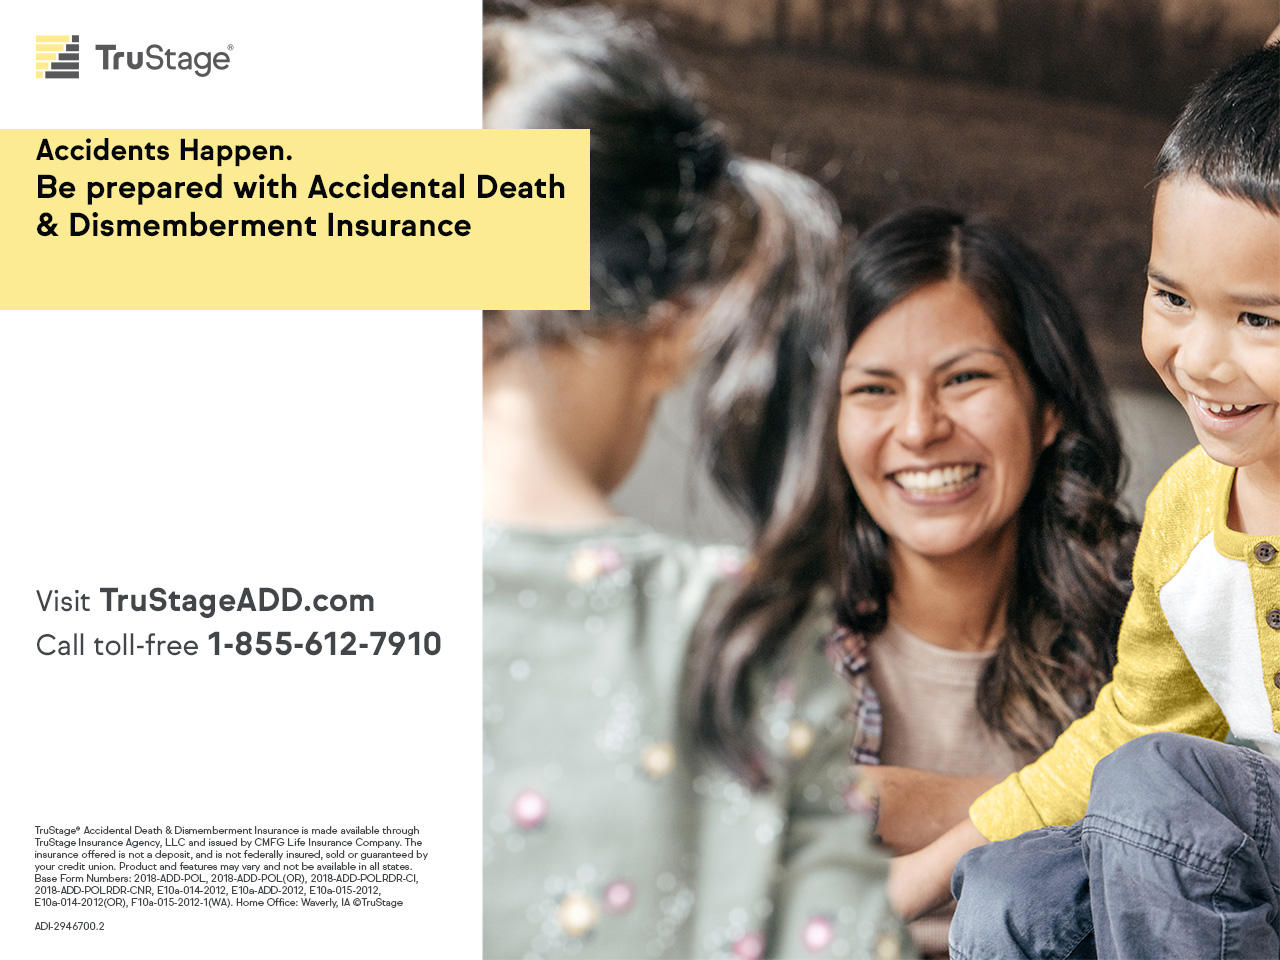 mother smiling at child trustage ad